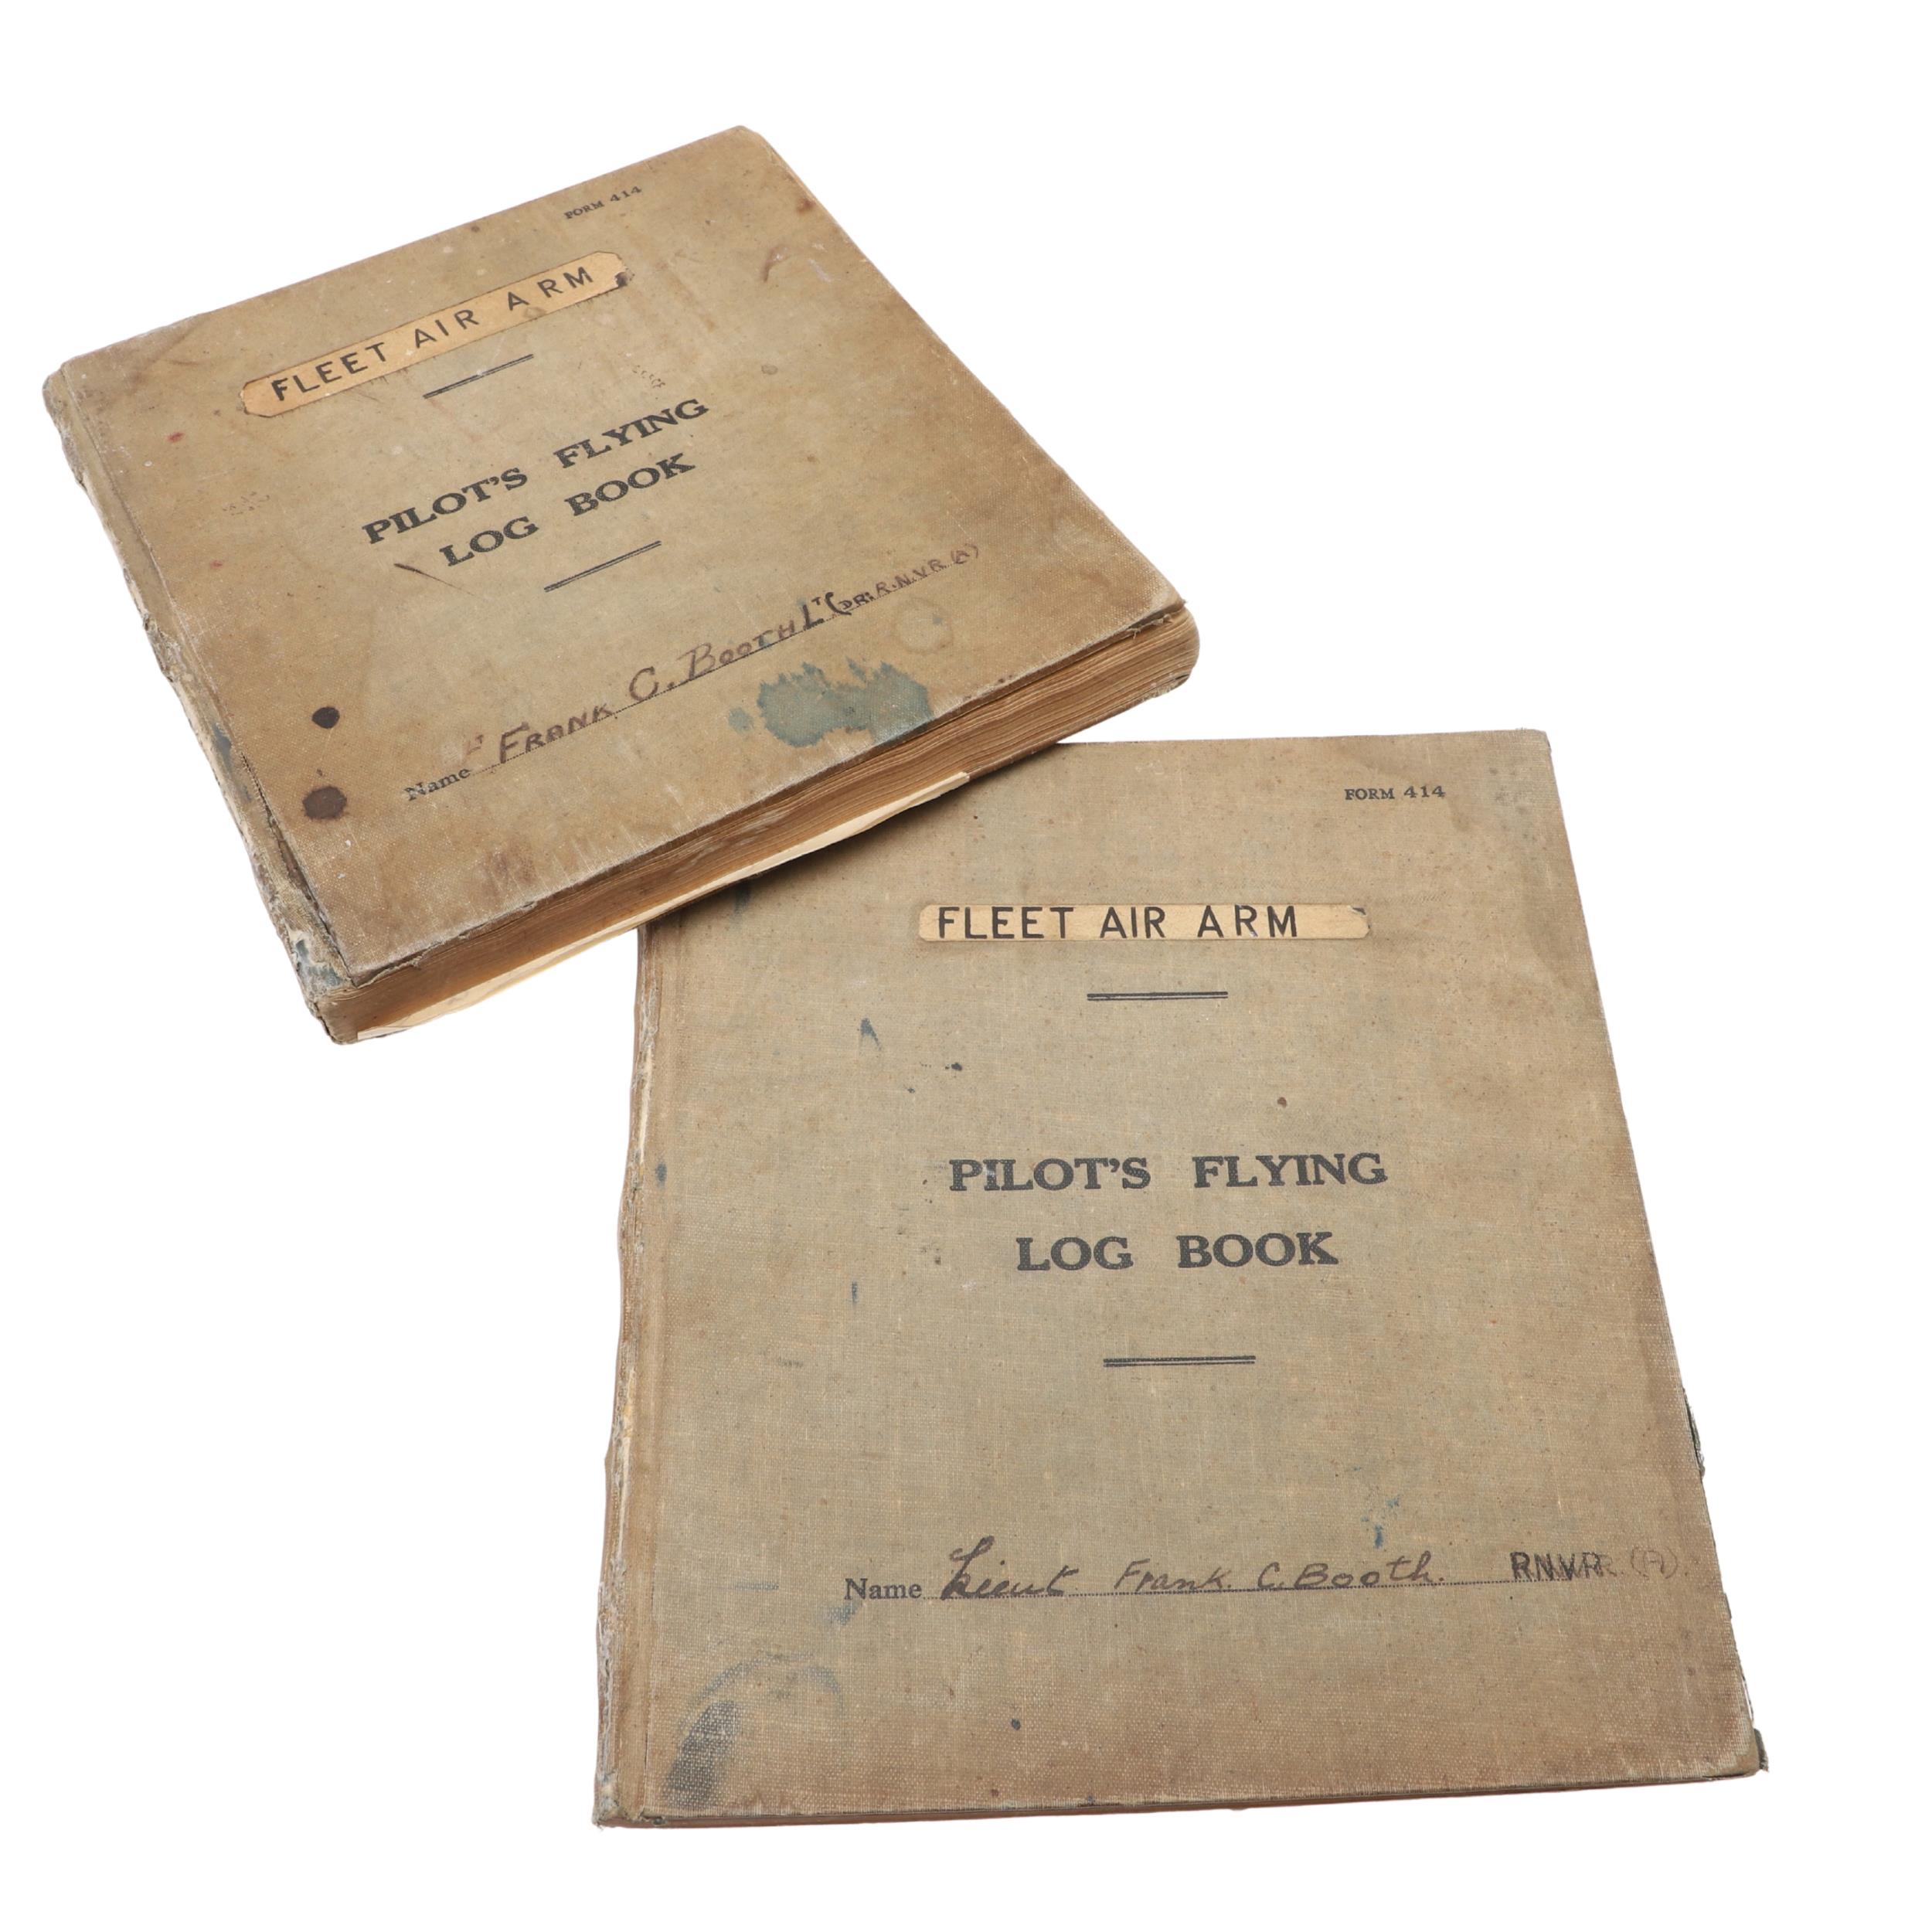 THE SECOND WORLD WAR FLYING LOG BOOKS OF LT CDR. FRANK C. BOOTH.